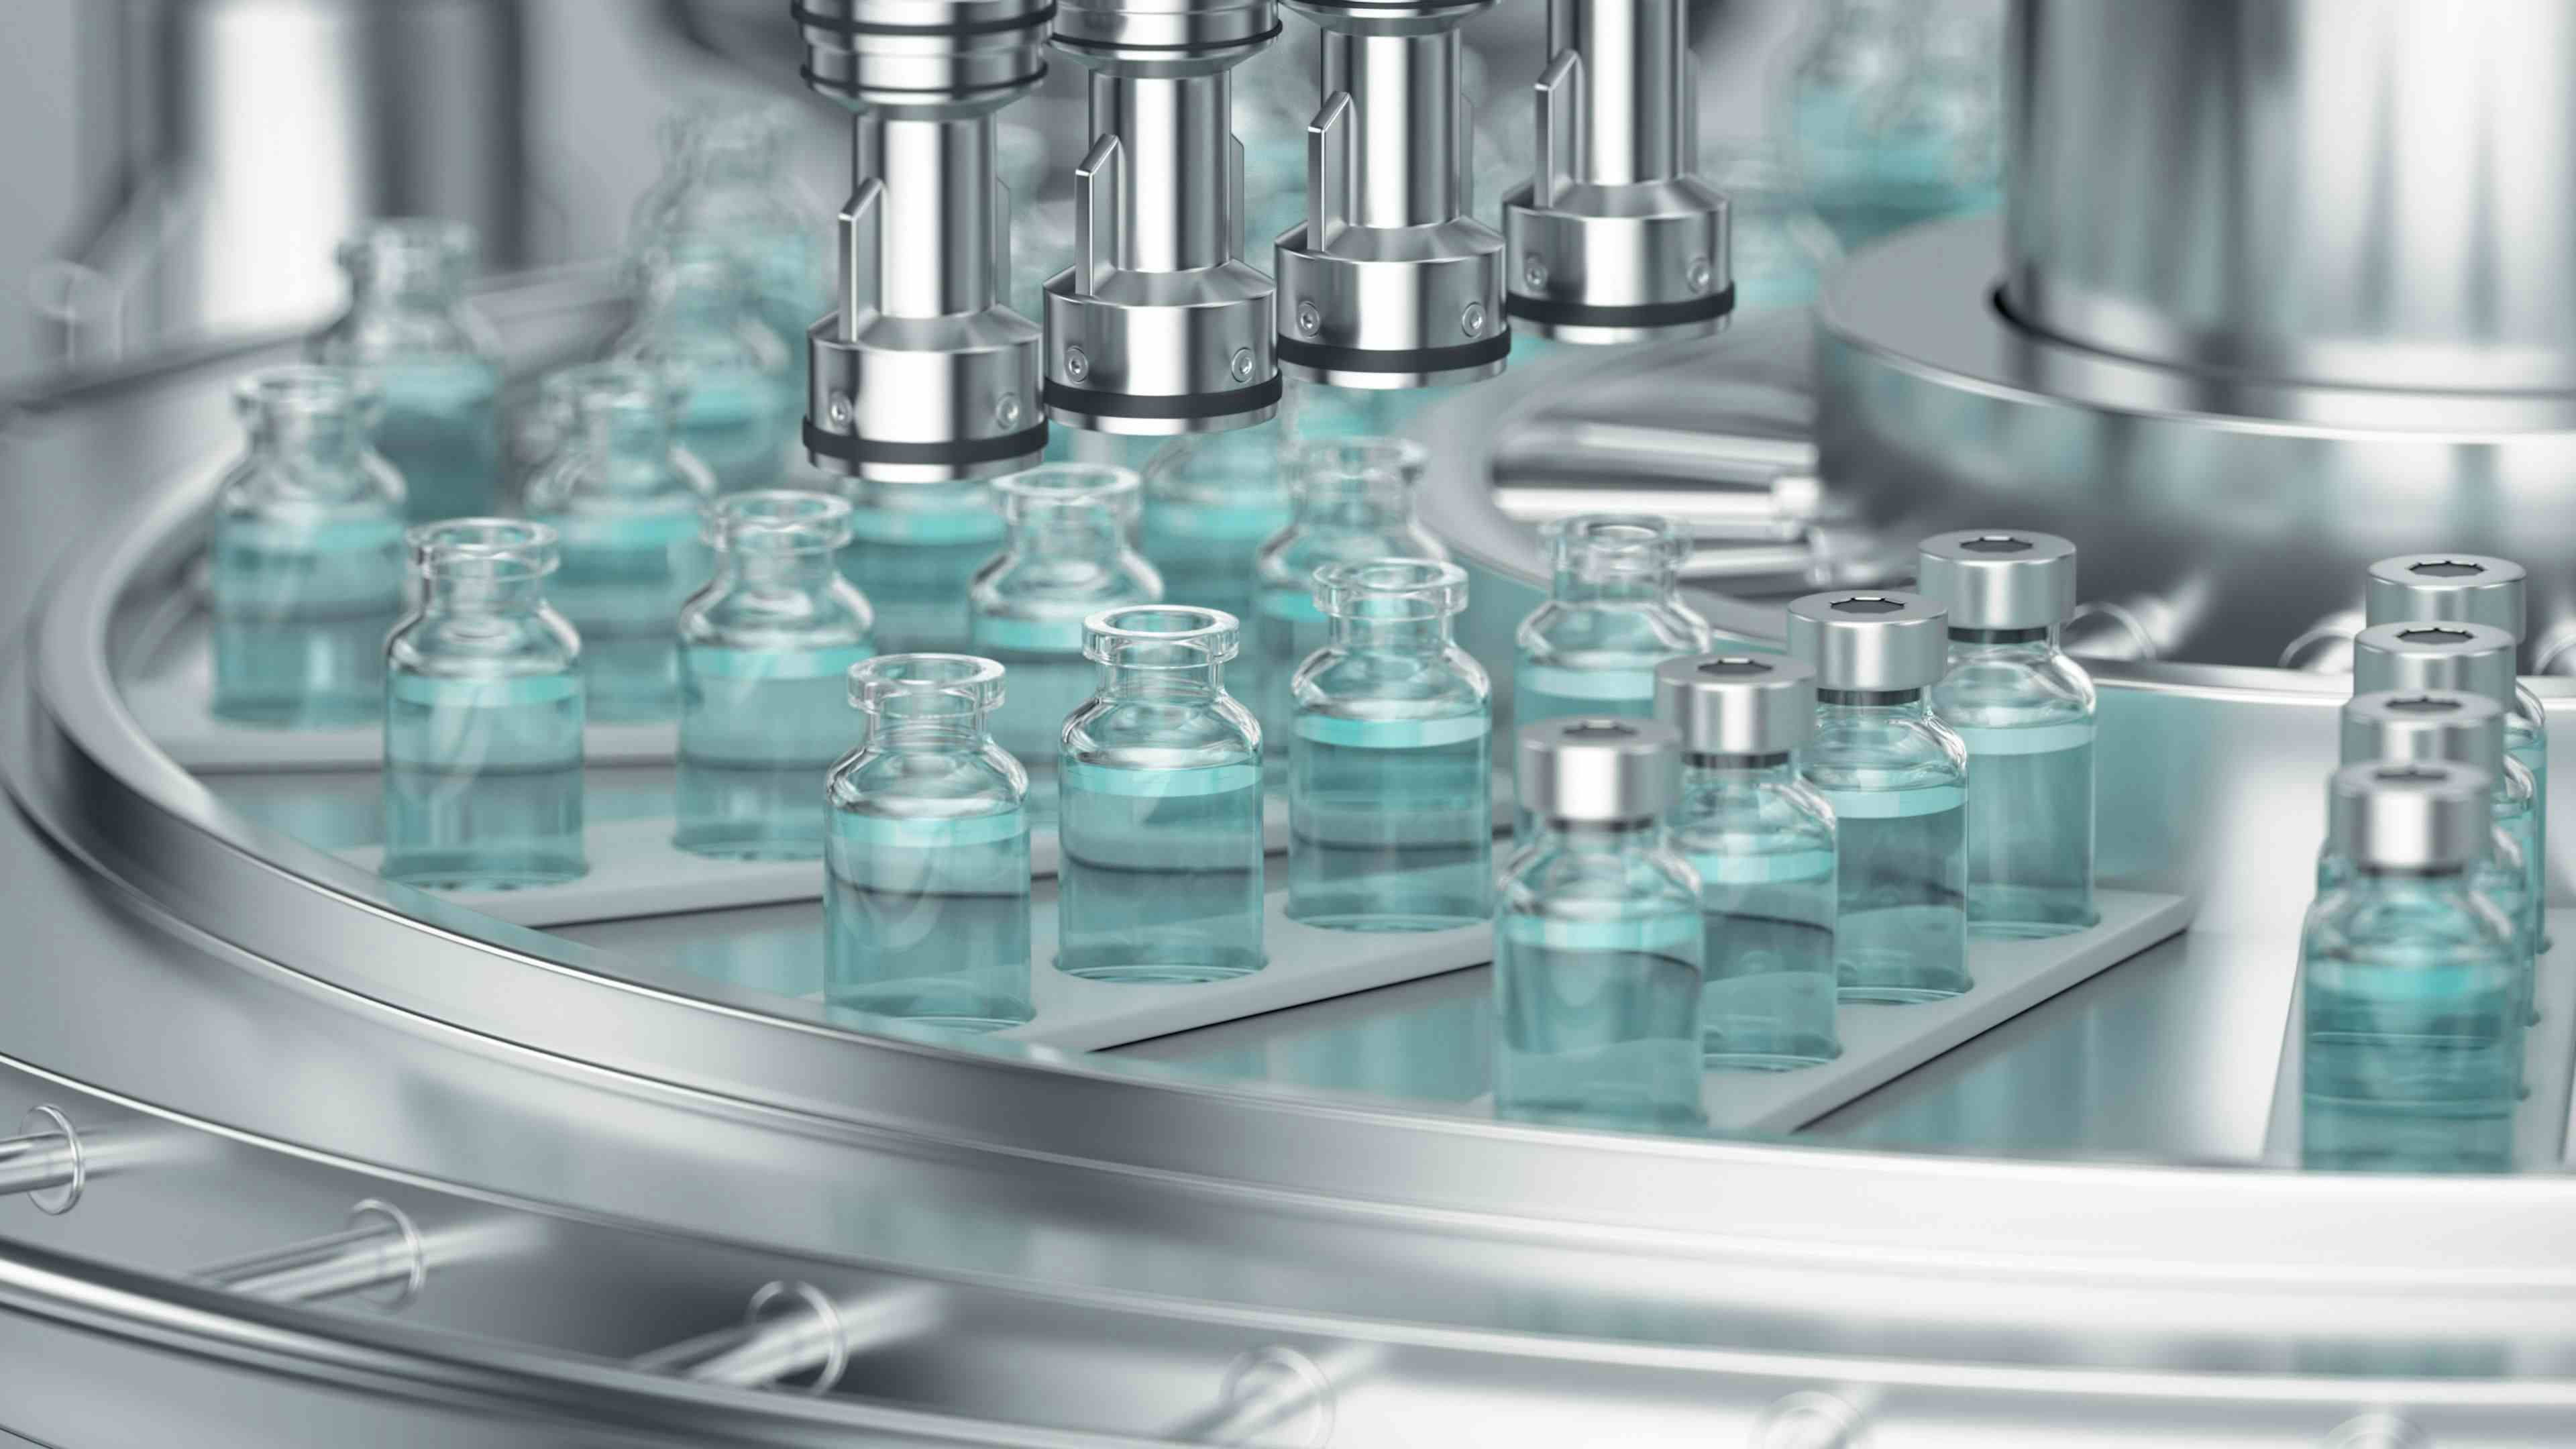 Pharmaceutical manufacture background with glass bottles with clear liquid on automatic conveyor line. | Image Credit: wacomka - stock.adobe.com